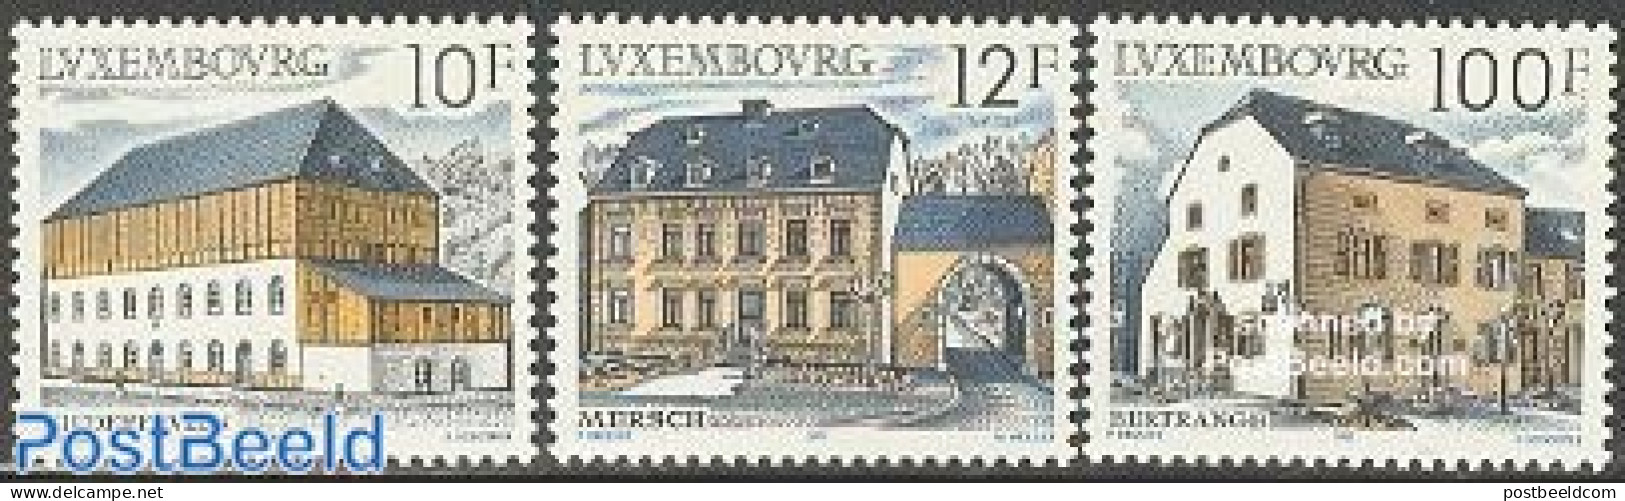 Luxemburg 1987 European Rural Campaign 3v, Mint NH, History - Europa Hang-on Issues - Post - Art - Architecture - Unused Stamps